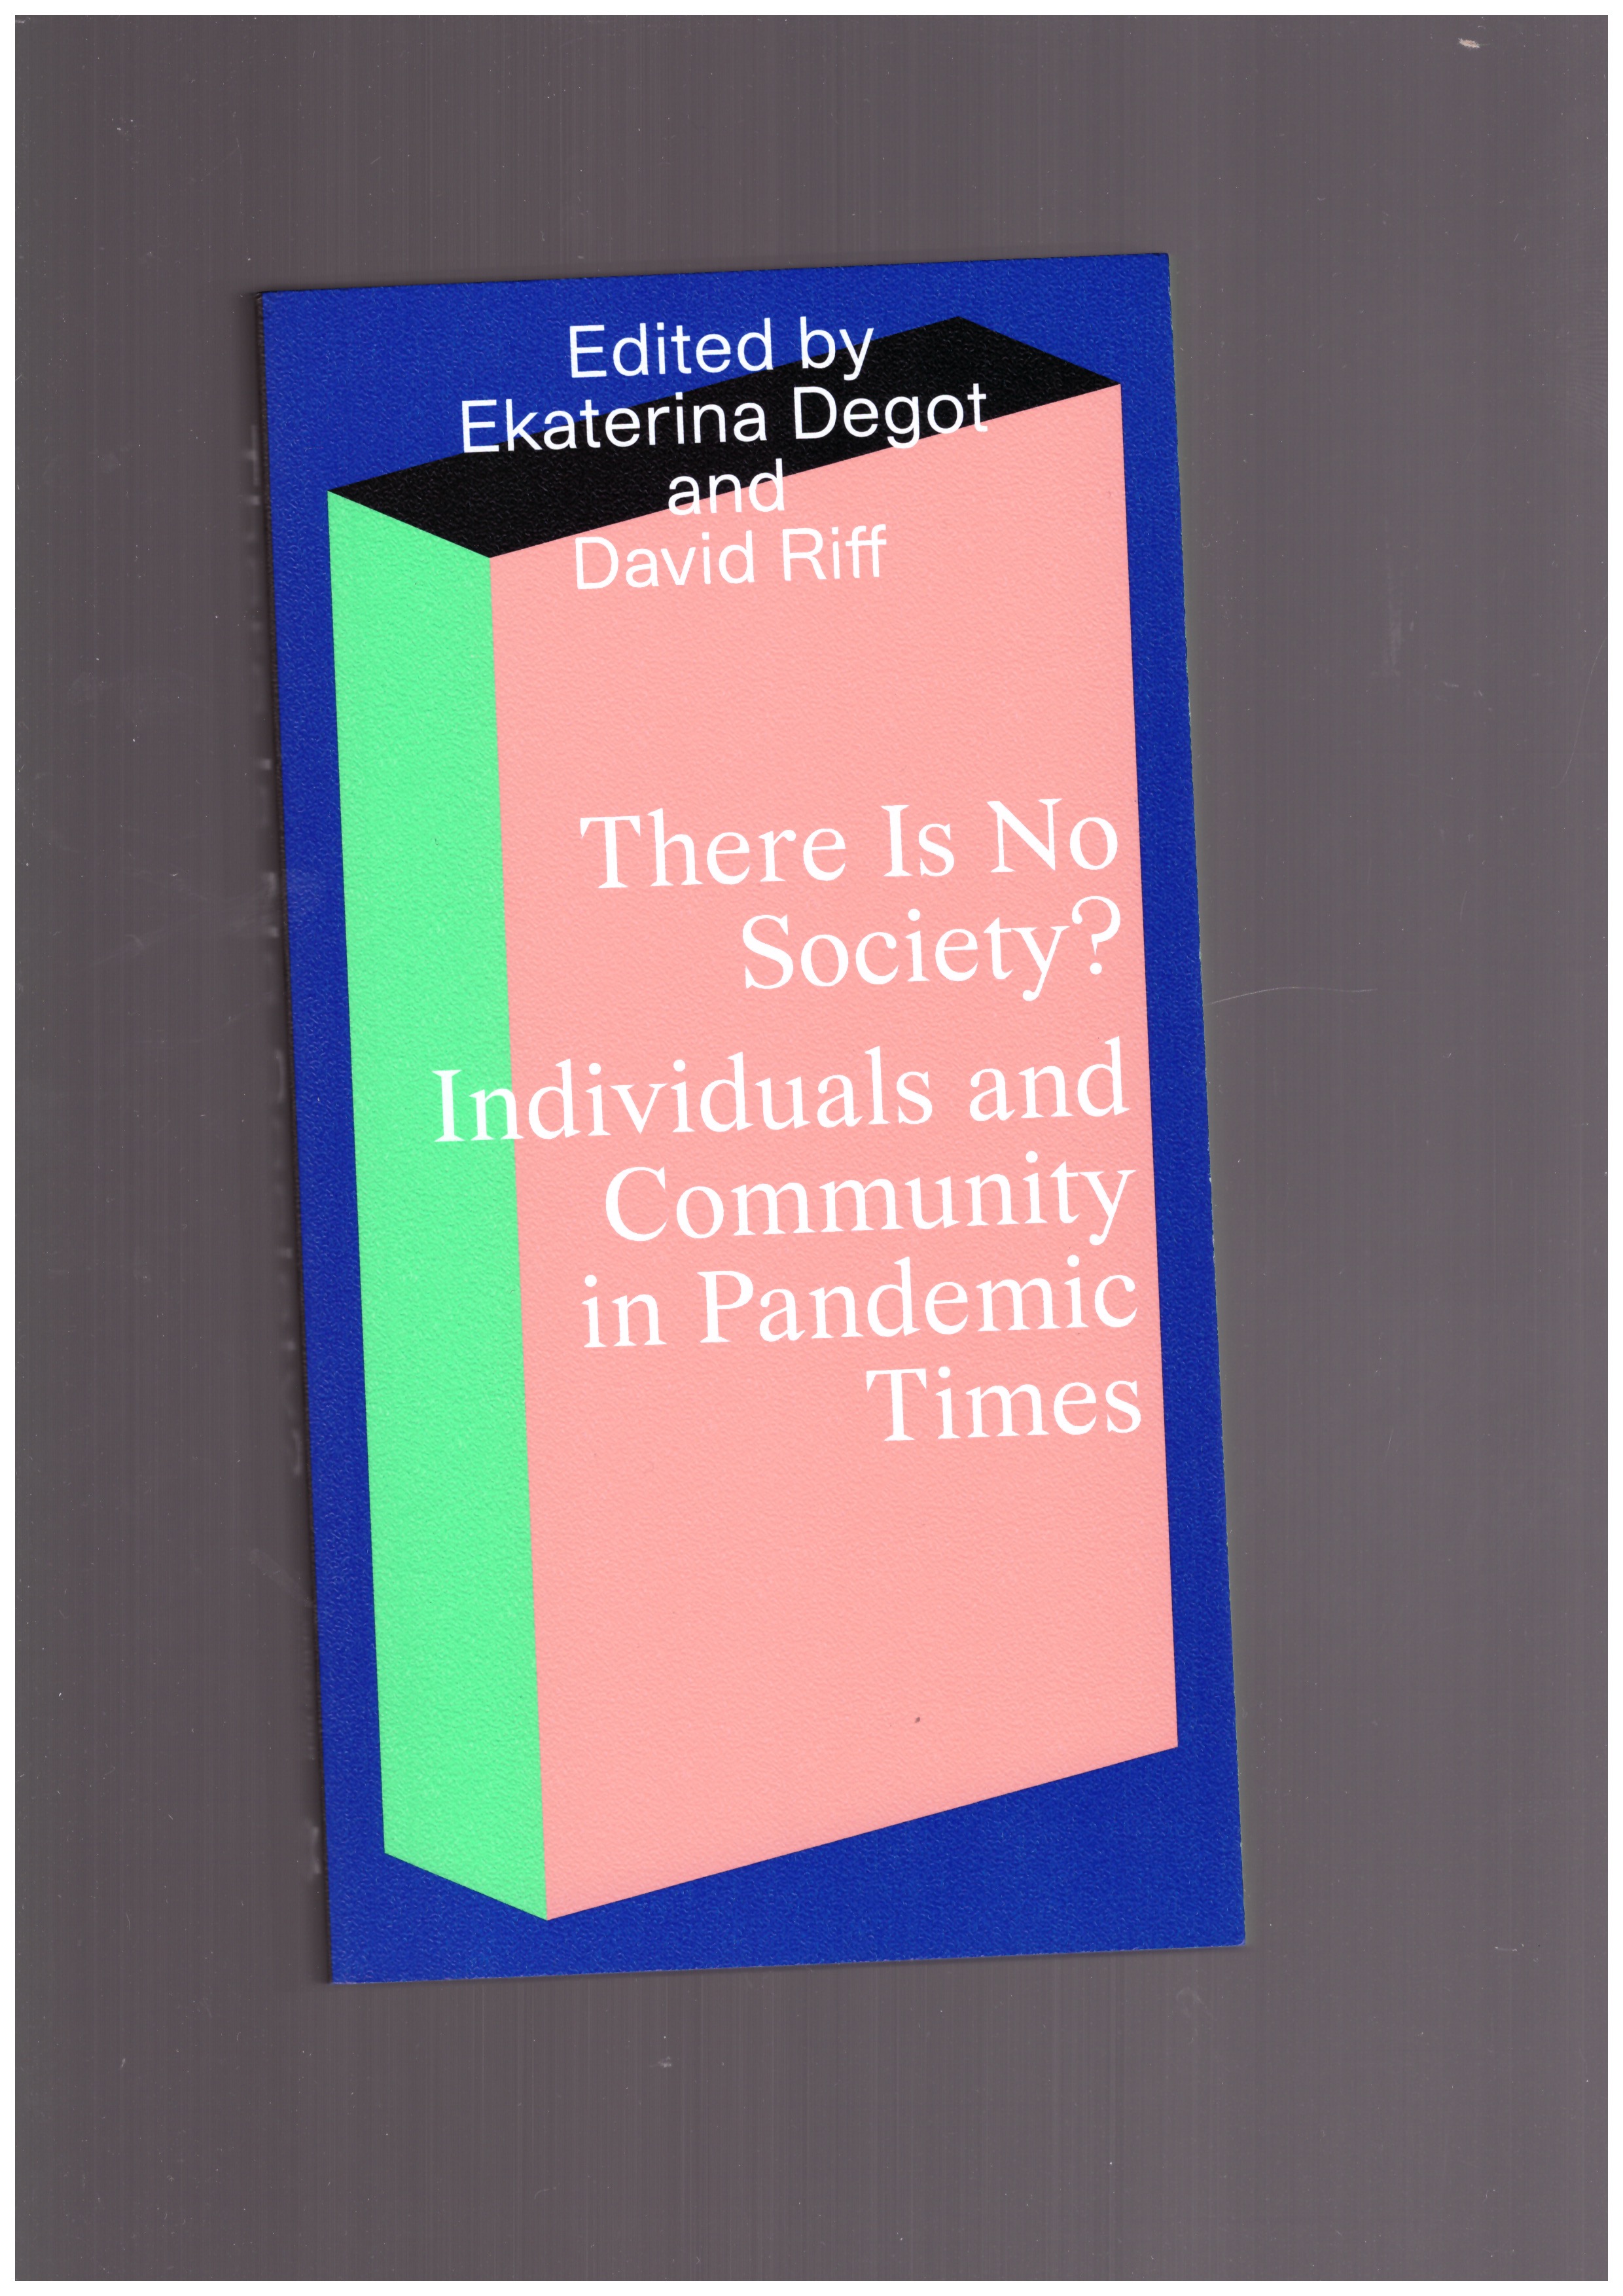 DEGOT, Ekaterina; RIFF, David (eds.) - There Is No Society? Individuals and Community in Pandemic Times